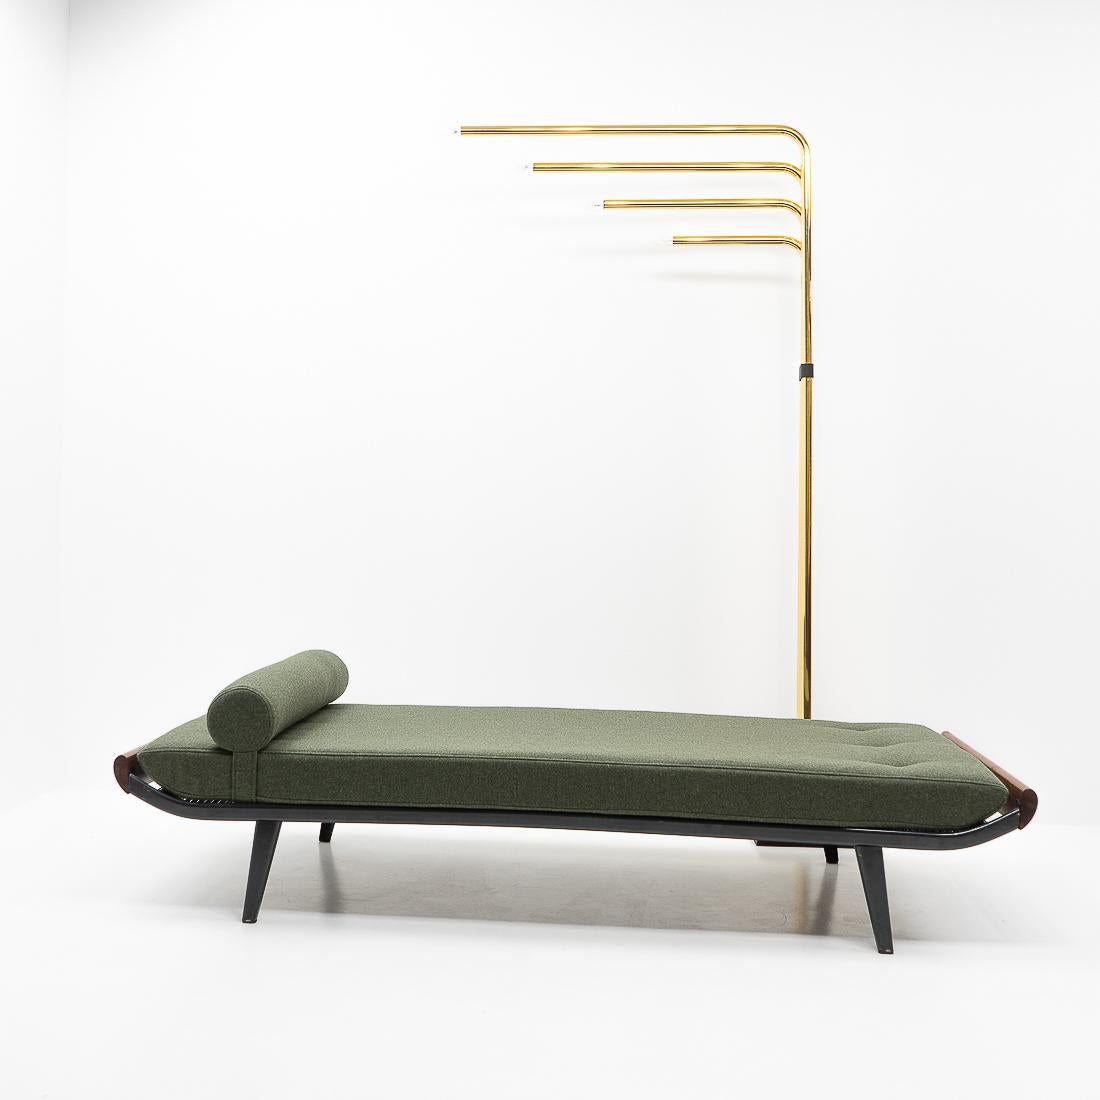 Metal Industrial Design Classic Cleopatra Daybed by Dick Cordemijer for Auping, 1950s